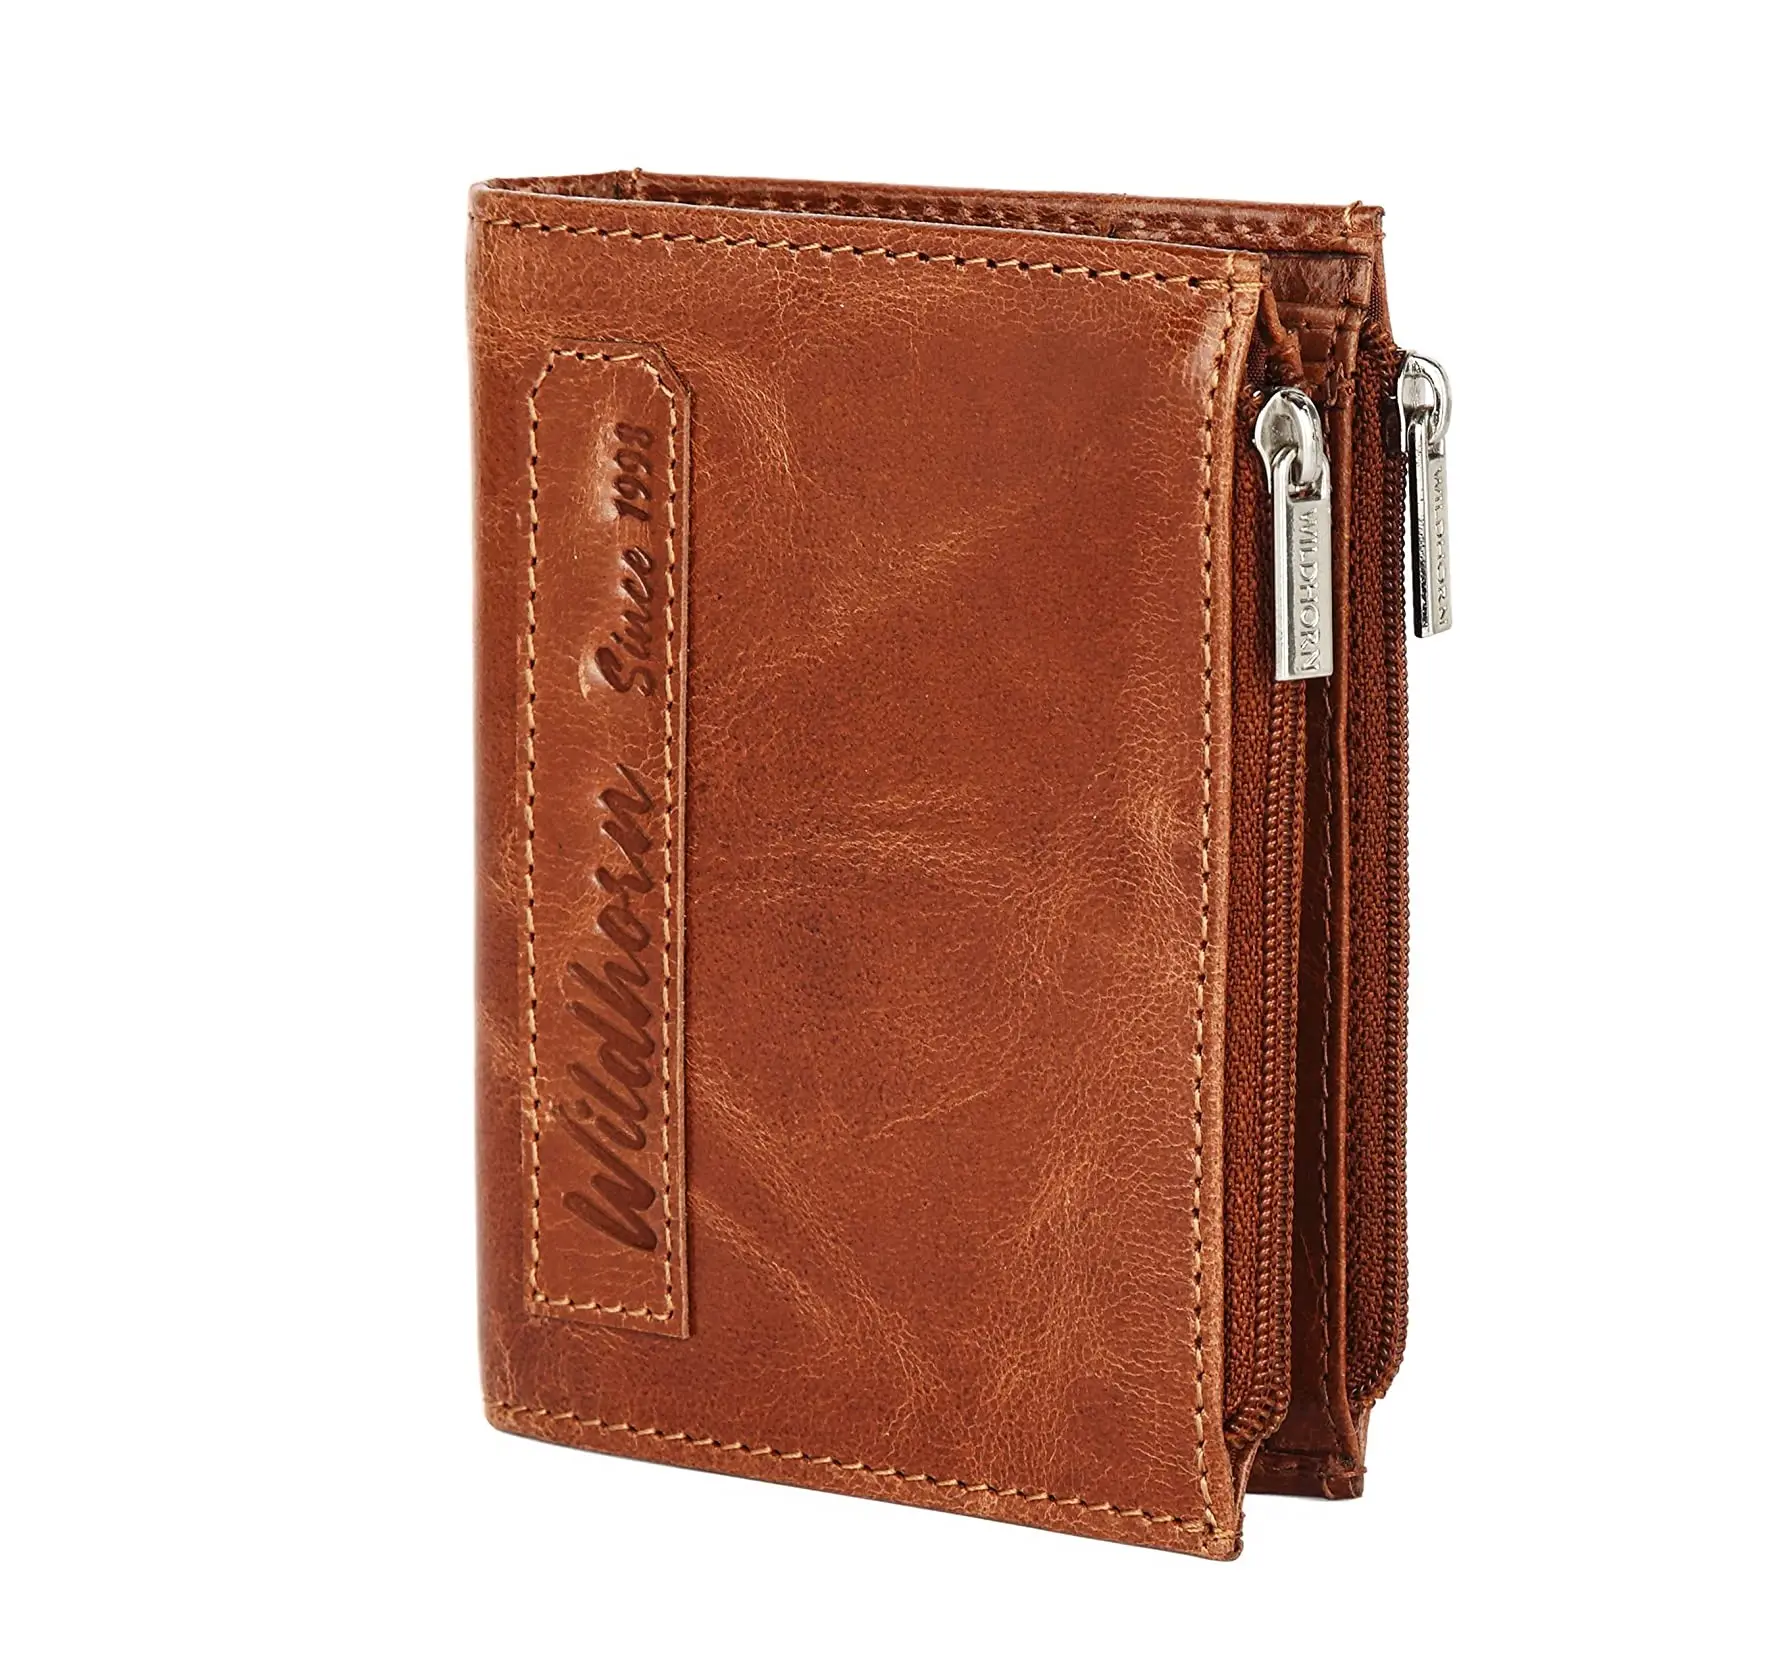 India top Brand Classic business men Zipper long leather Wallet with RFID Protection